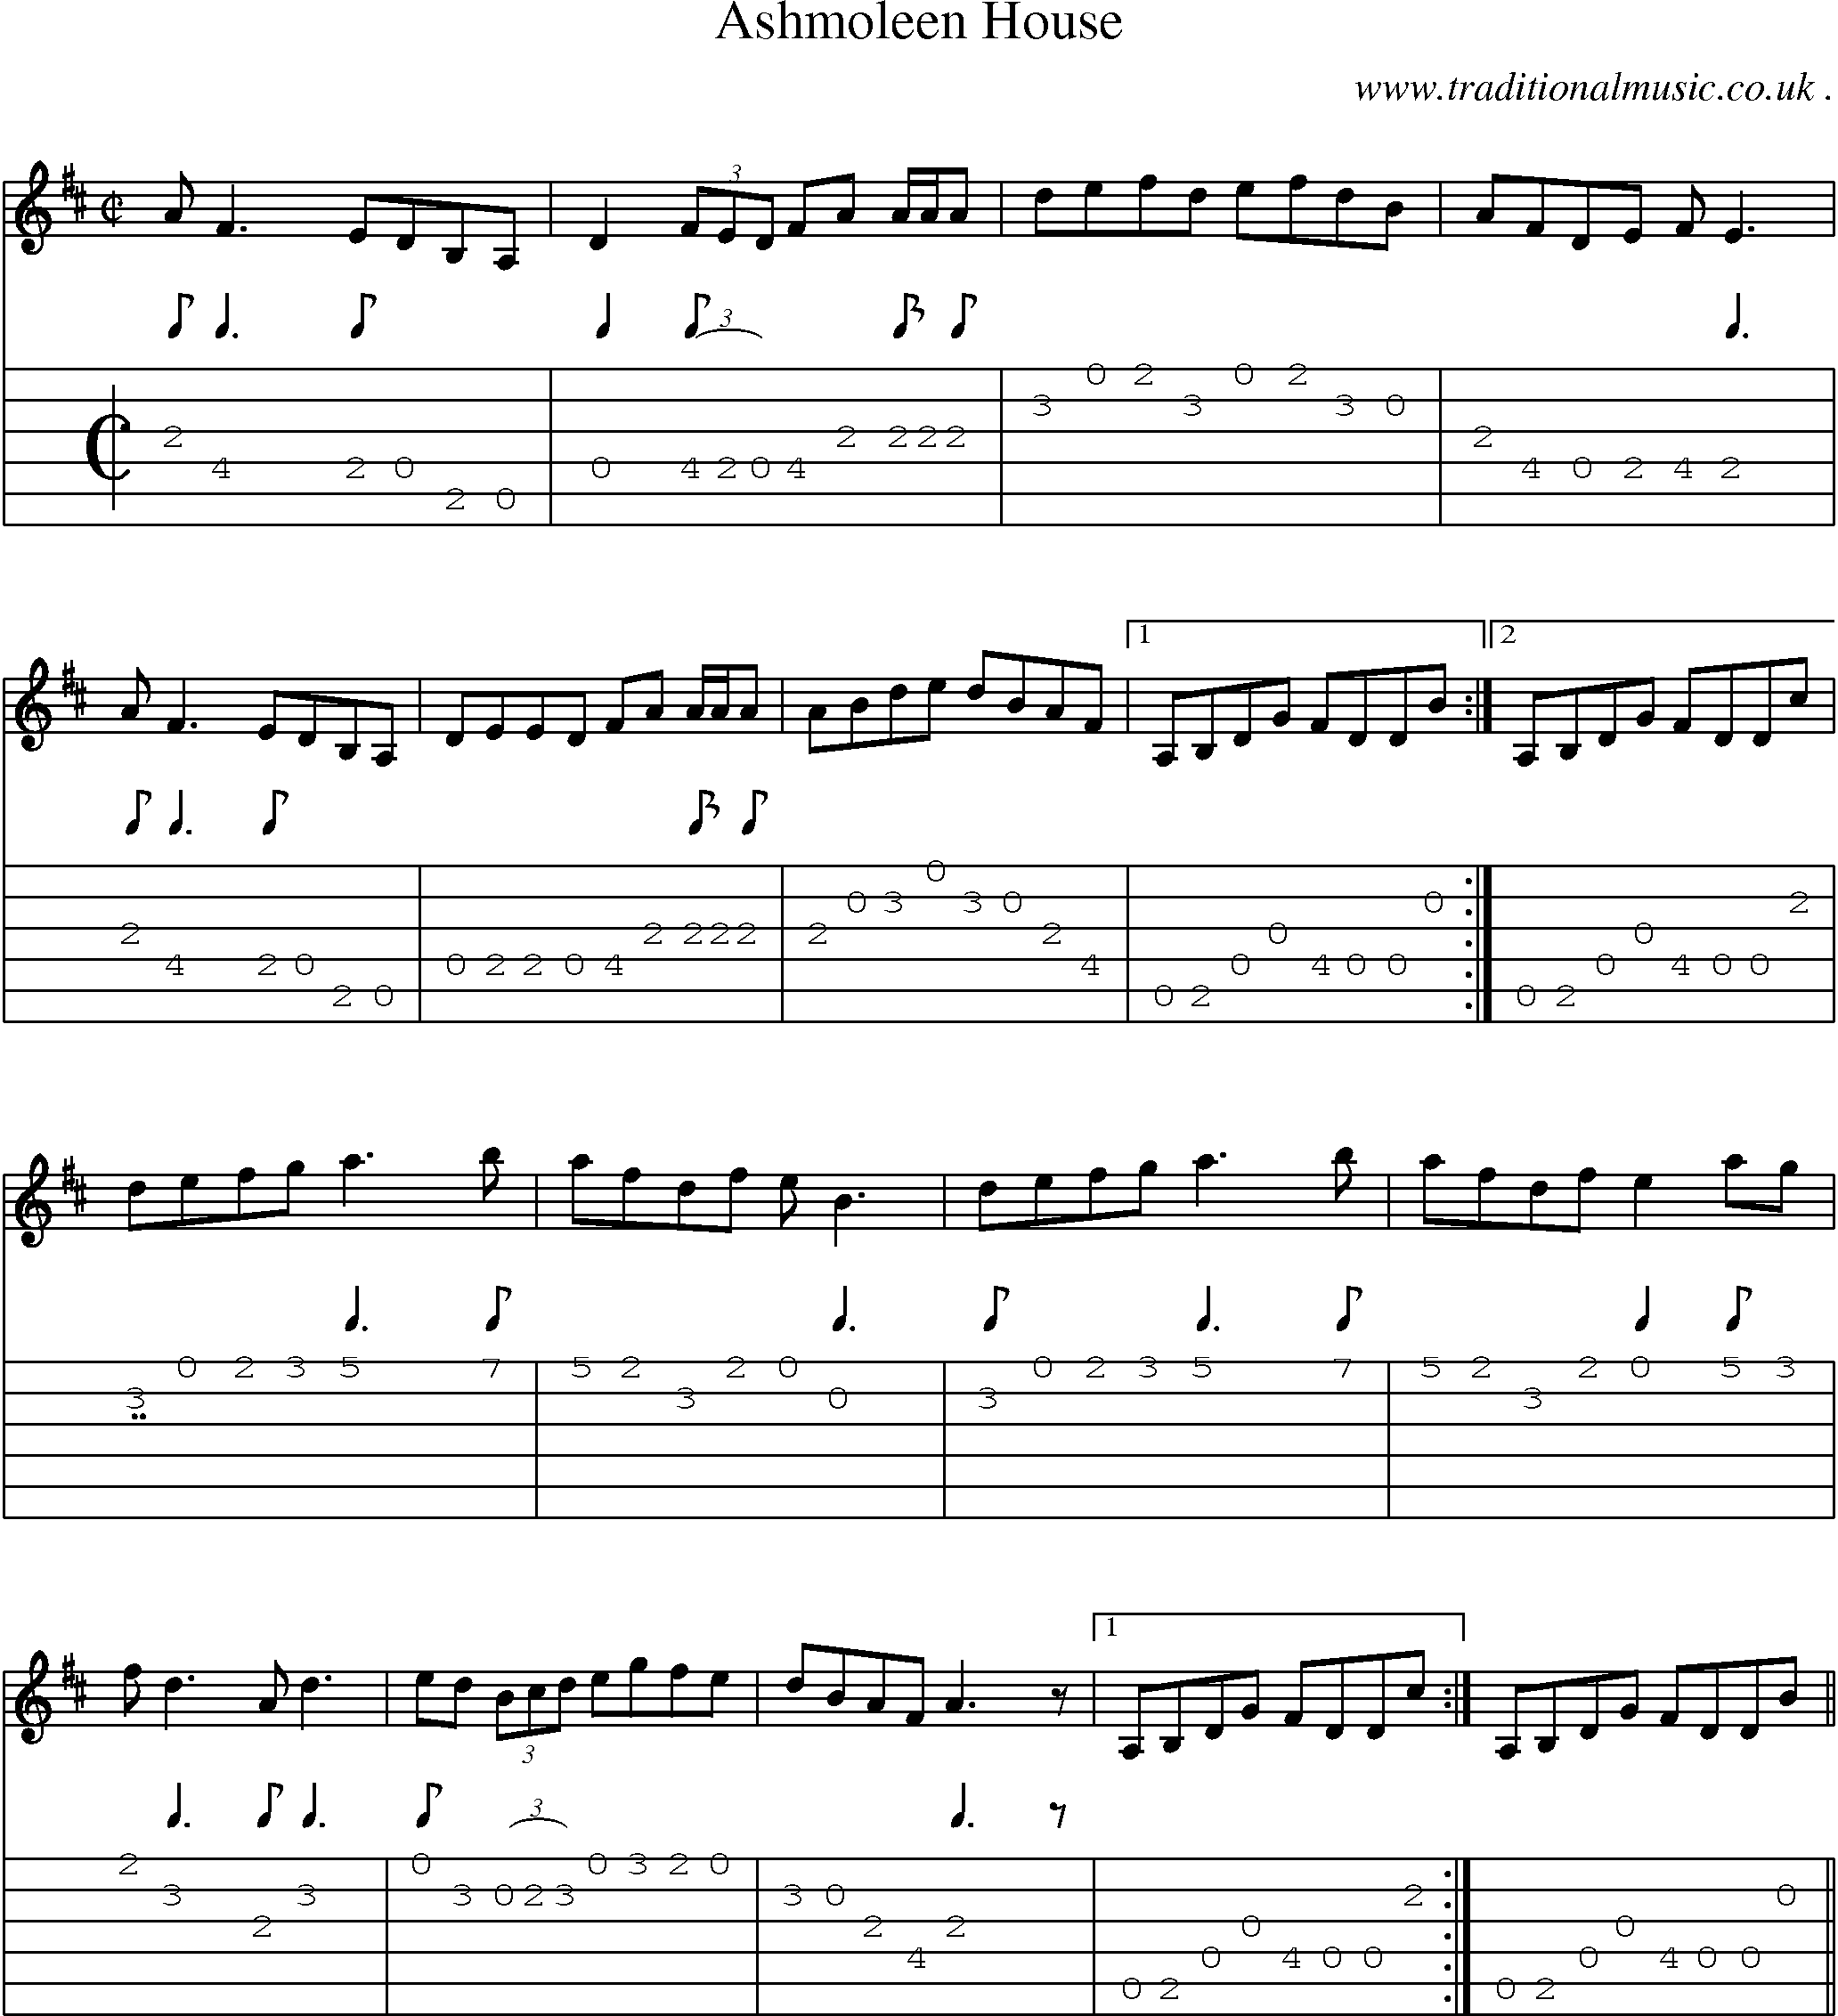 Sheet-Music and Guitar Tabs for Ashmoleen House